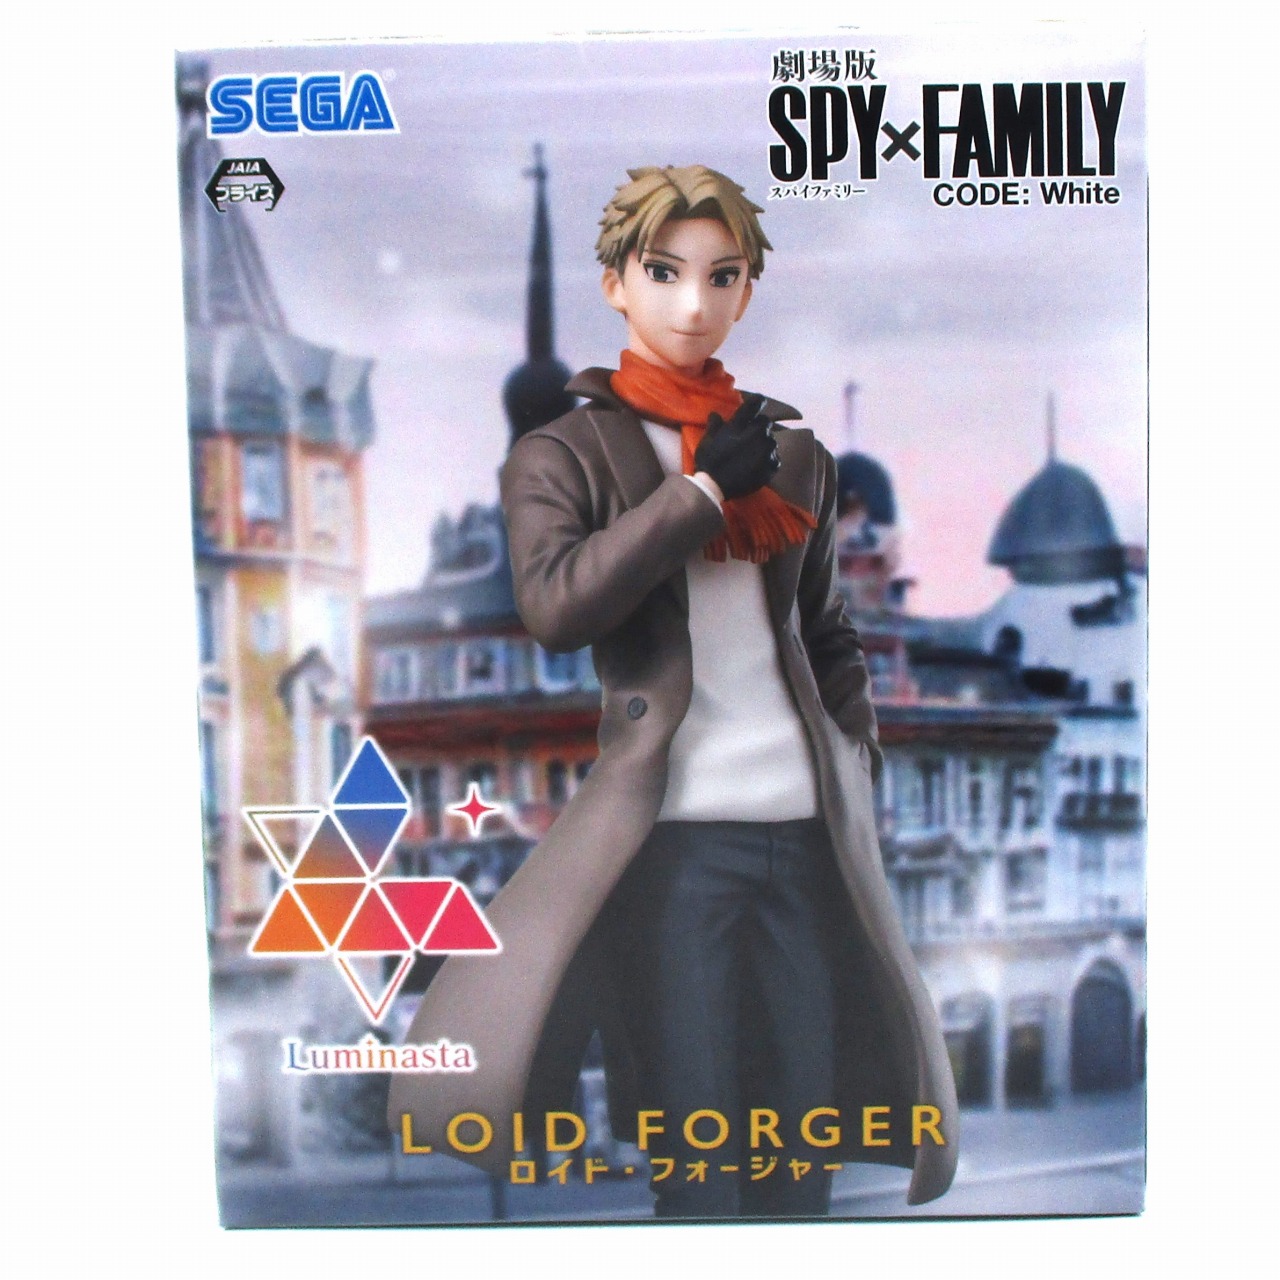 JUNGLE Special Collectors Shop / セガ 劇場版 SPY×FAMILY CODE:White Luminasta(ロイド・ フォージャー)